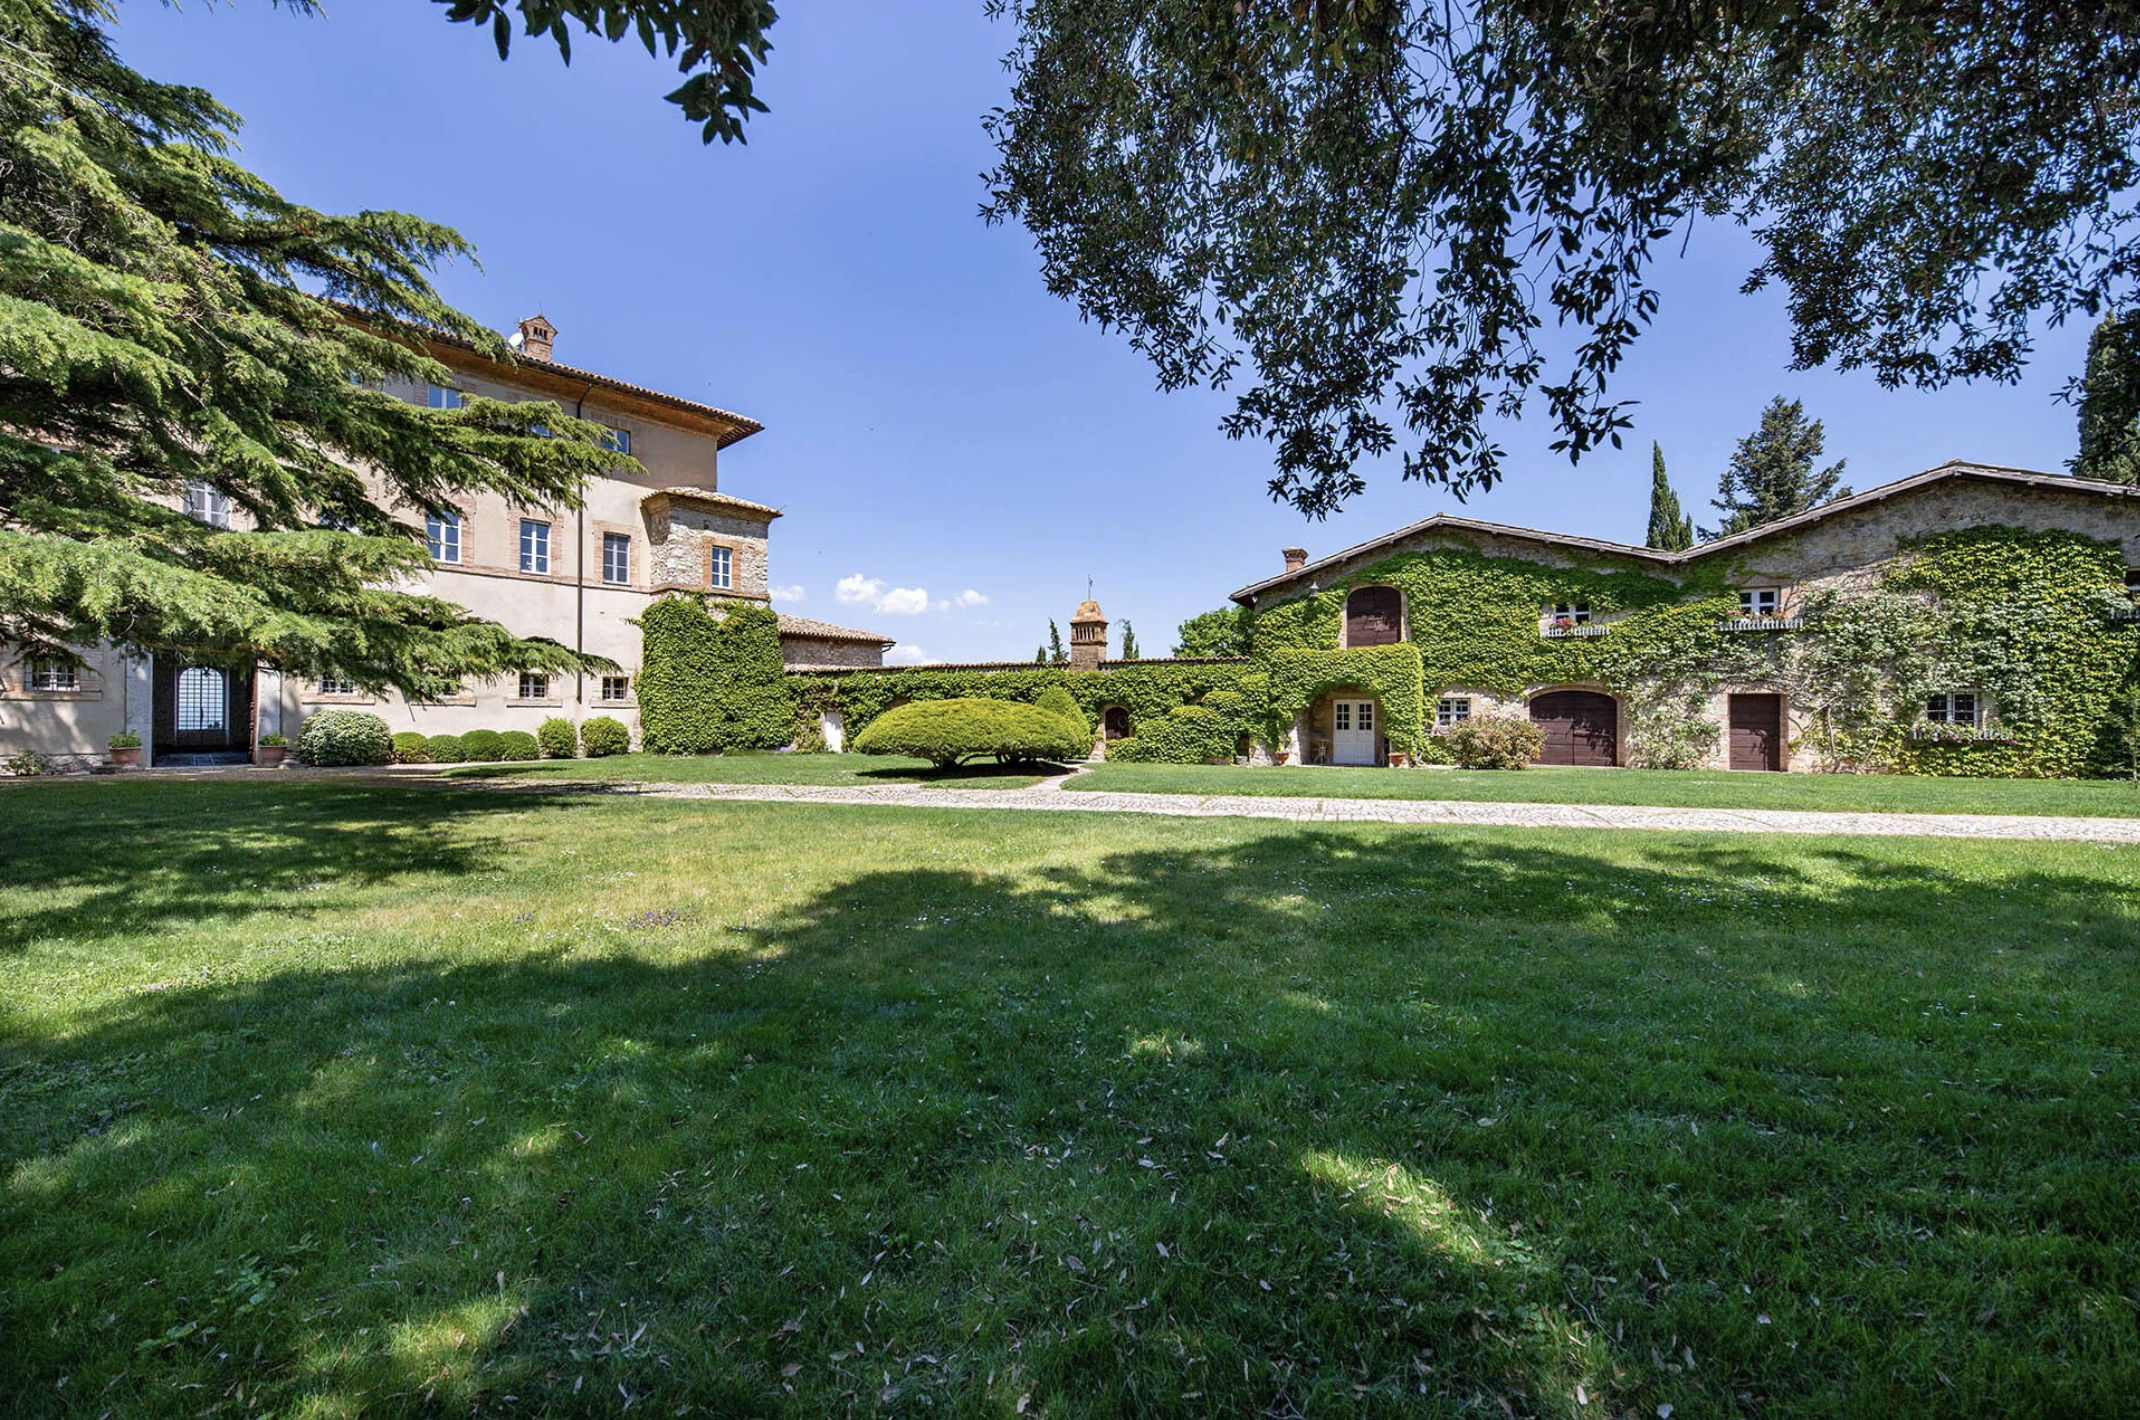 Francis York Historic Palazzo For Sale in Umbria, Italy Set in Private Park 23.png